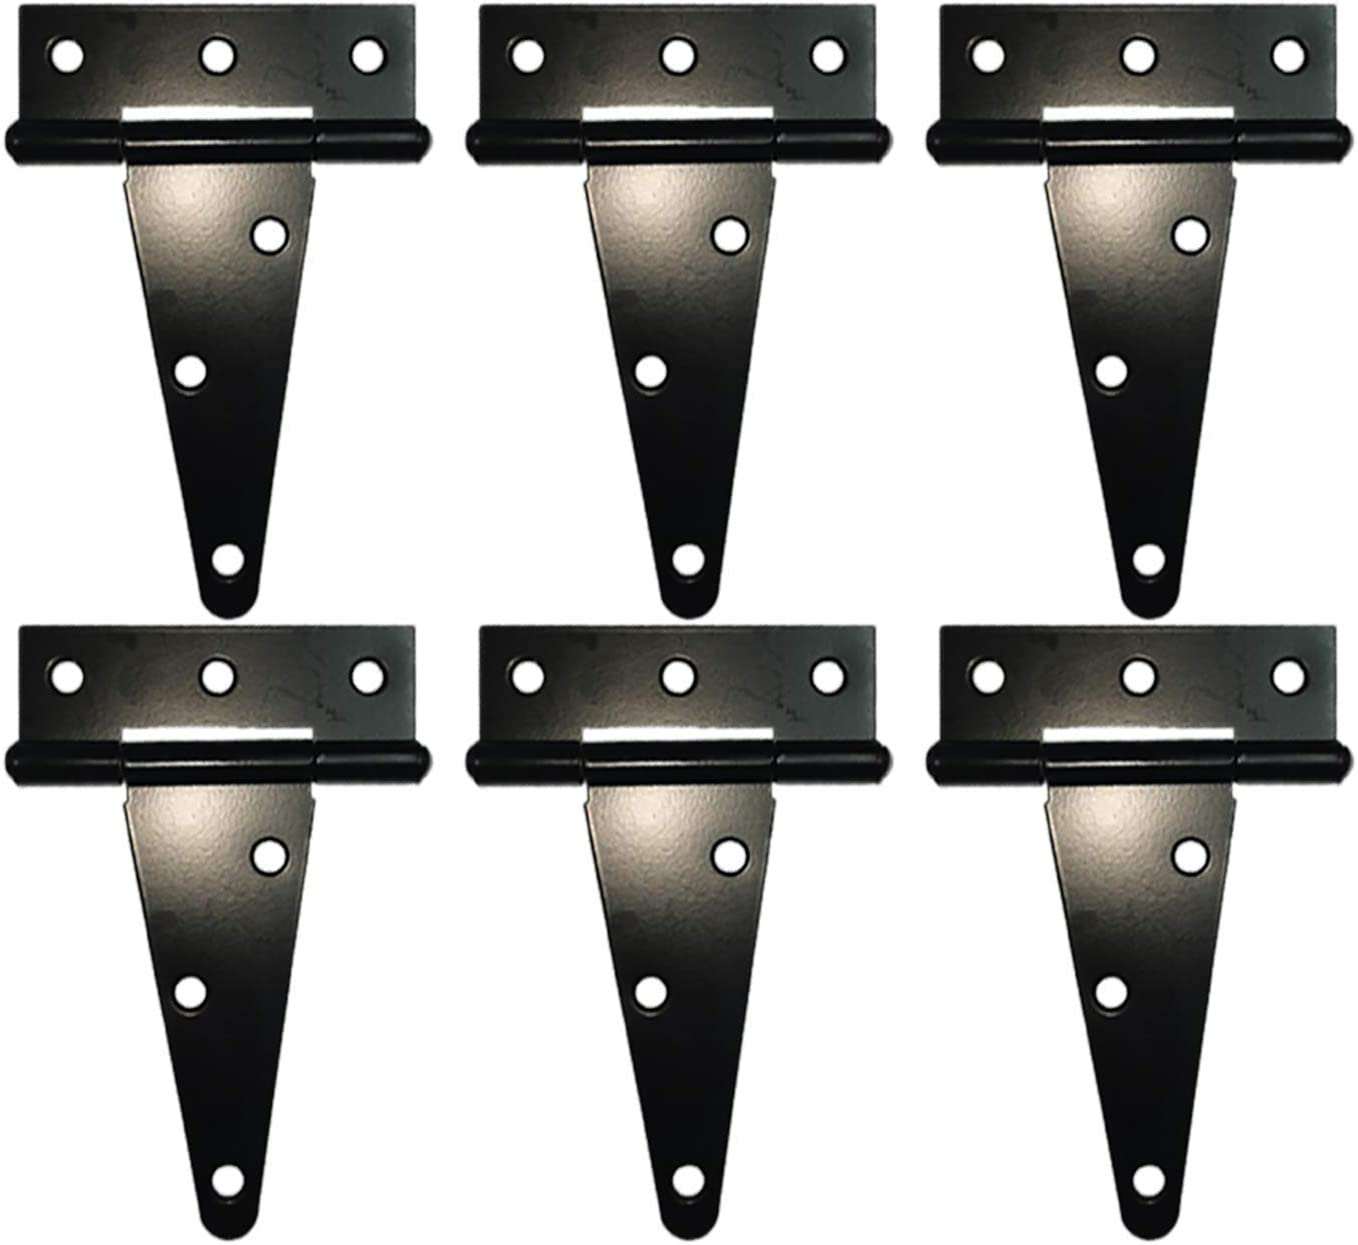 4 Inch Black T Hinges for Gates, Sheds, Barns, and Fences